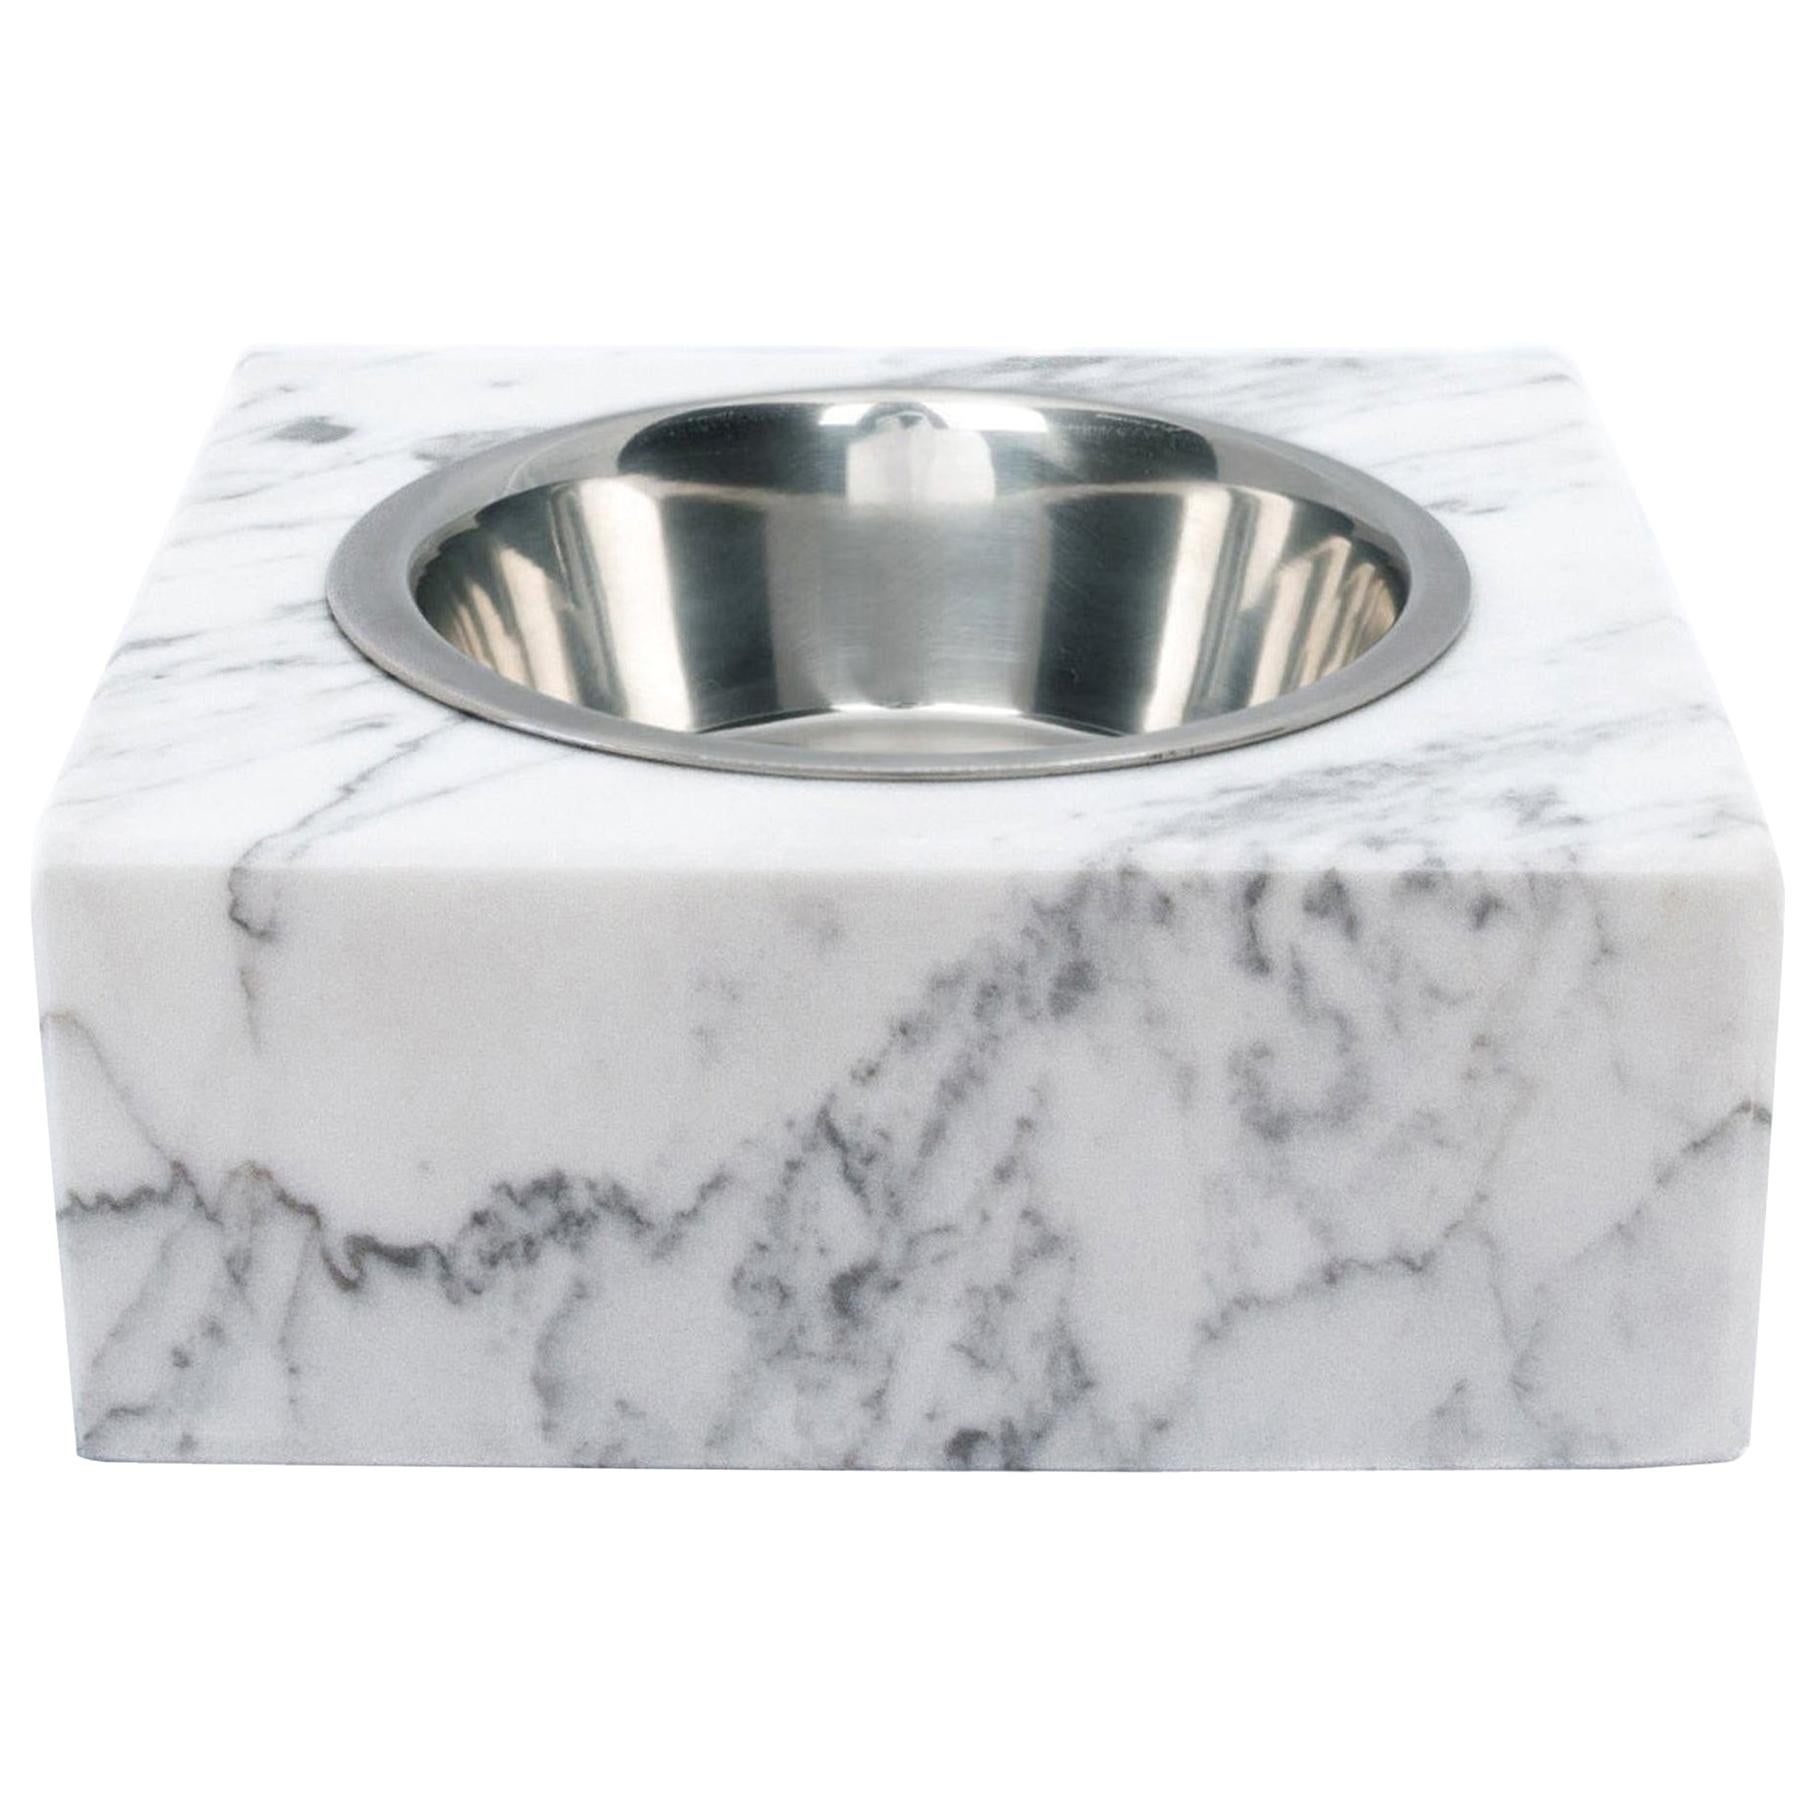 Handmade Squared White Carrara Marble Cats or Dogs Bowl with Removable Steel